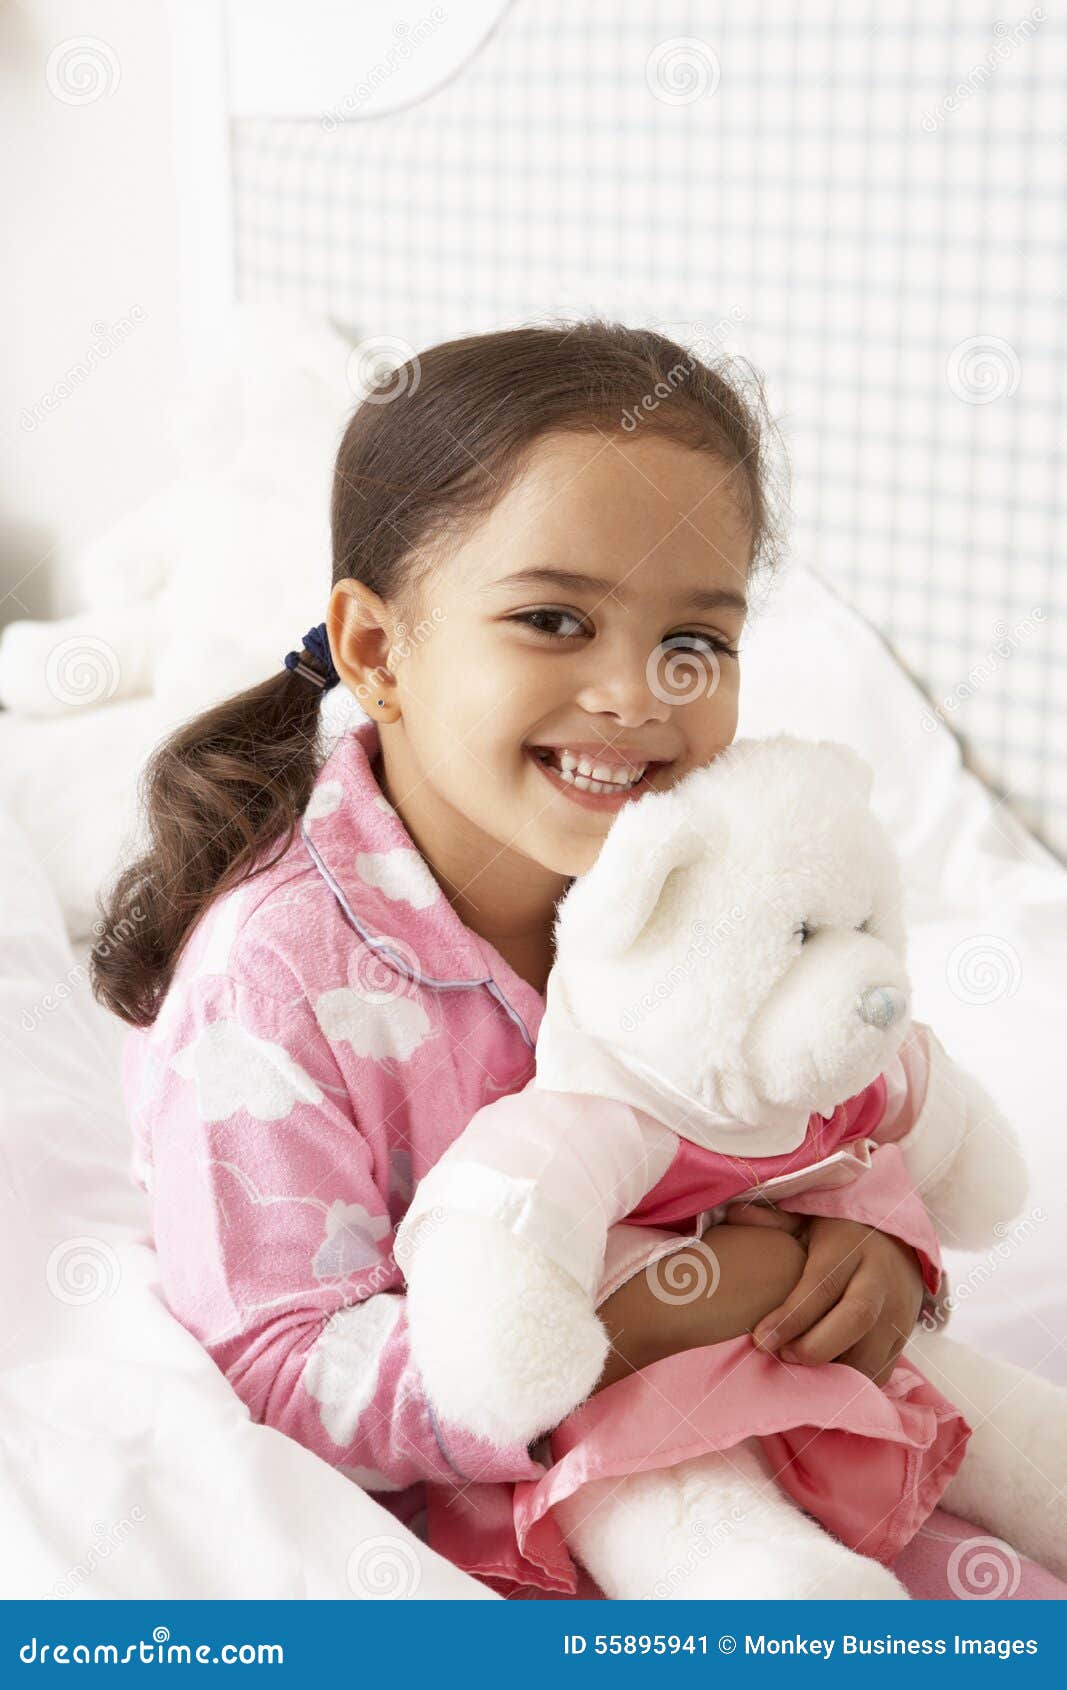 young girl wearing pajamas in bed with cuddly toy